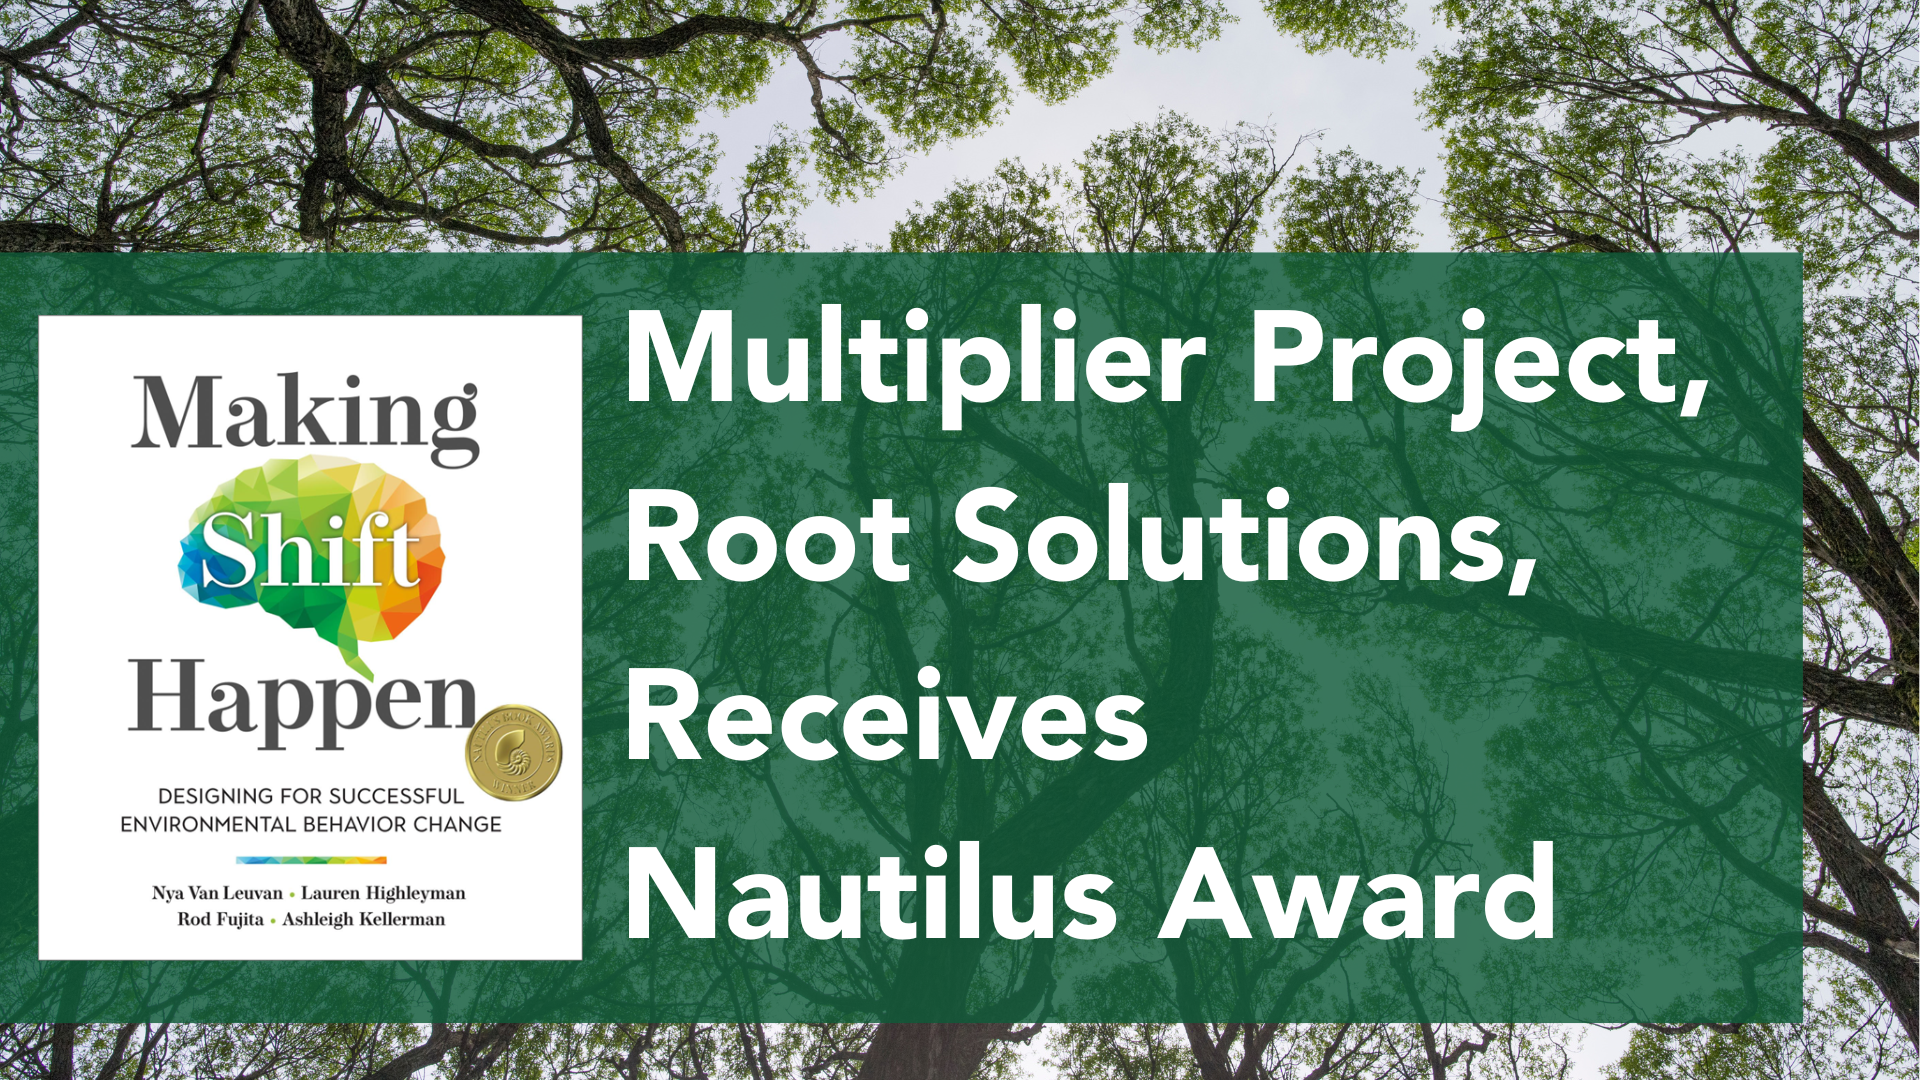 Multiplier Project, Root Solutions, Receives Nautilus Award for their book "Making Shift Happen"